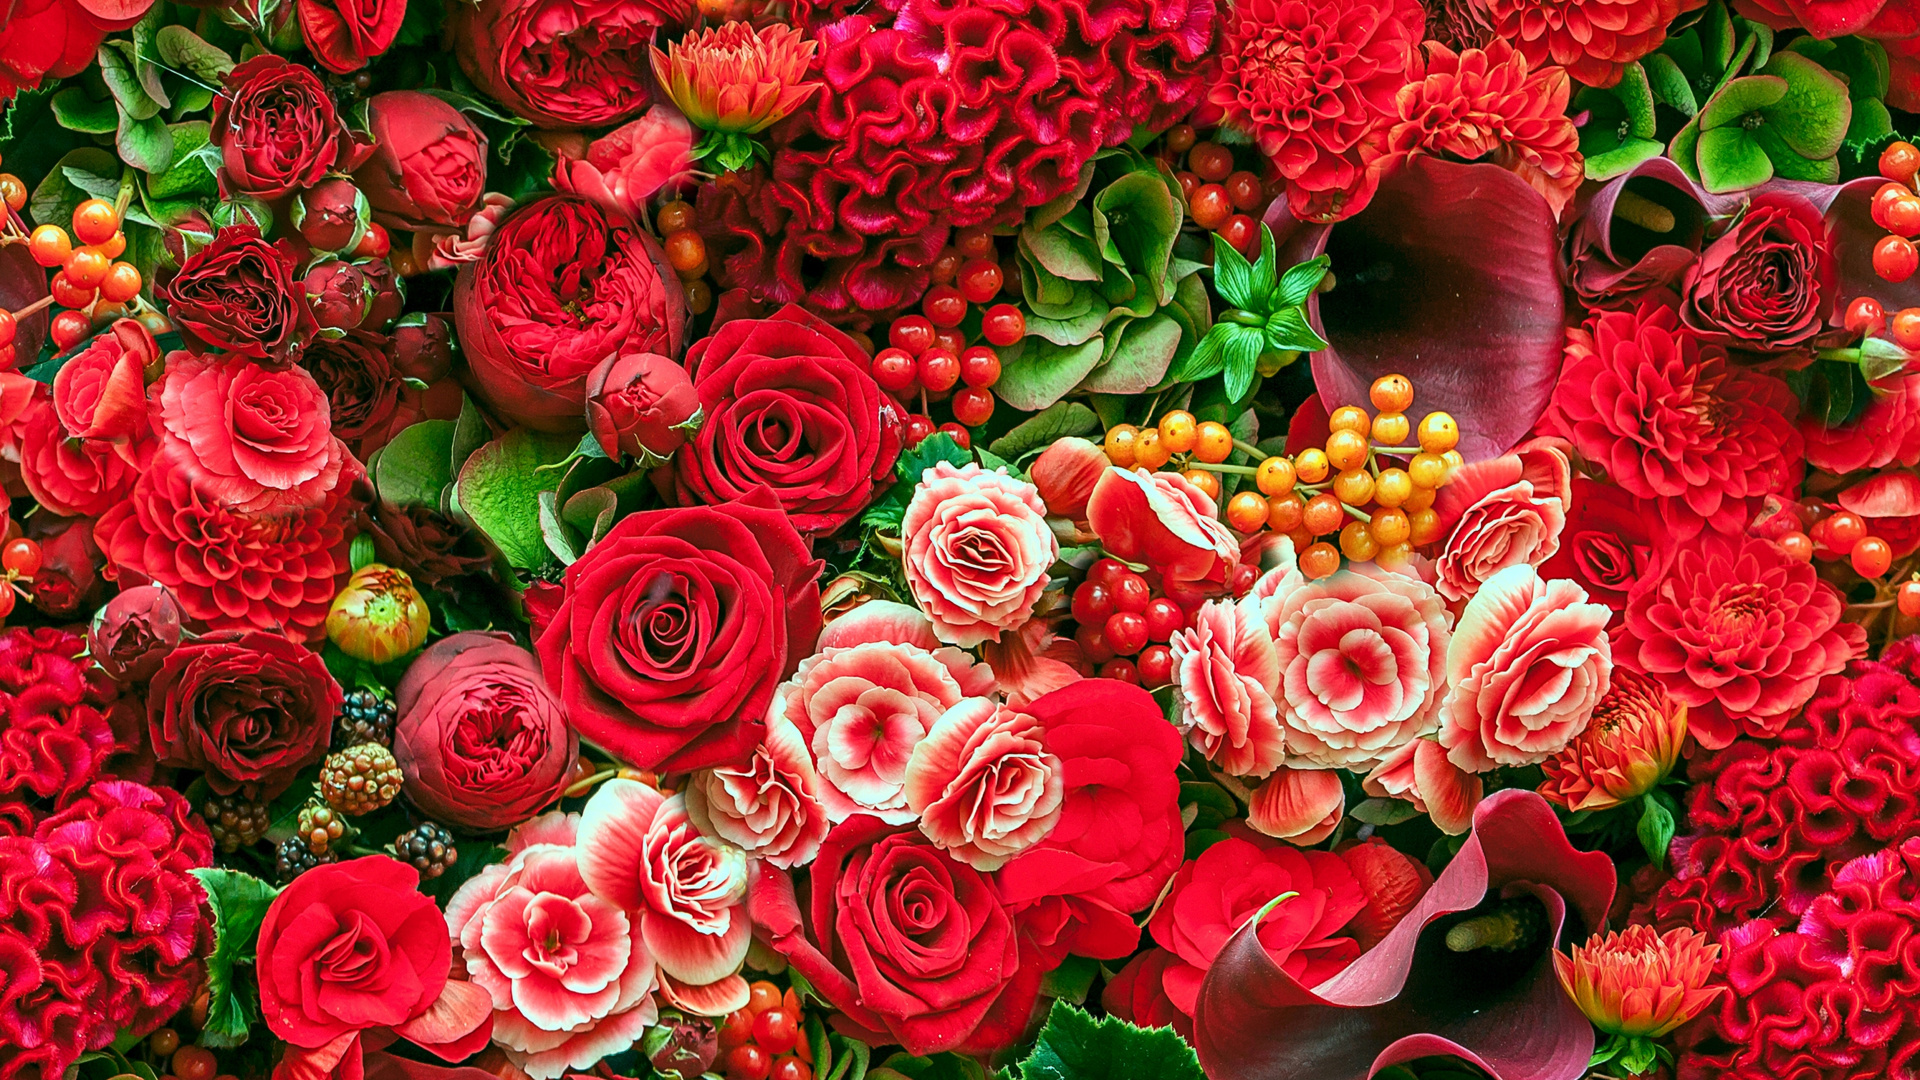 Red Roses With Green Leaves. Wallpaper in 1920x1080 Resolution